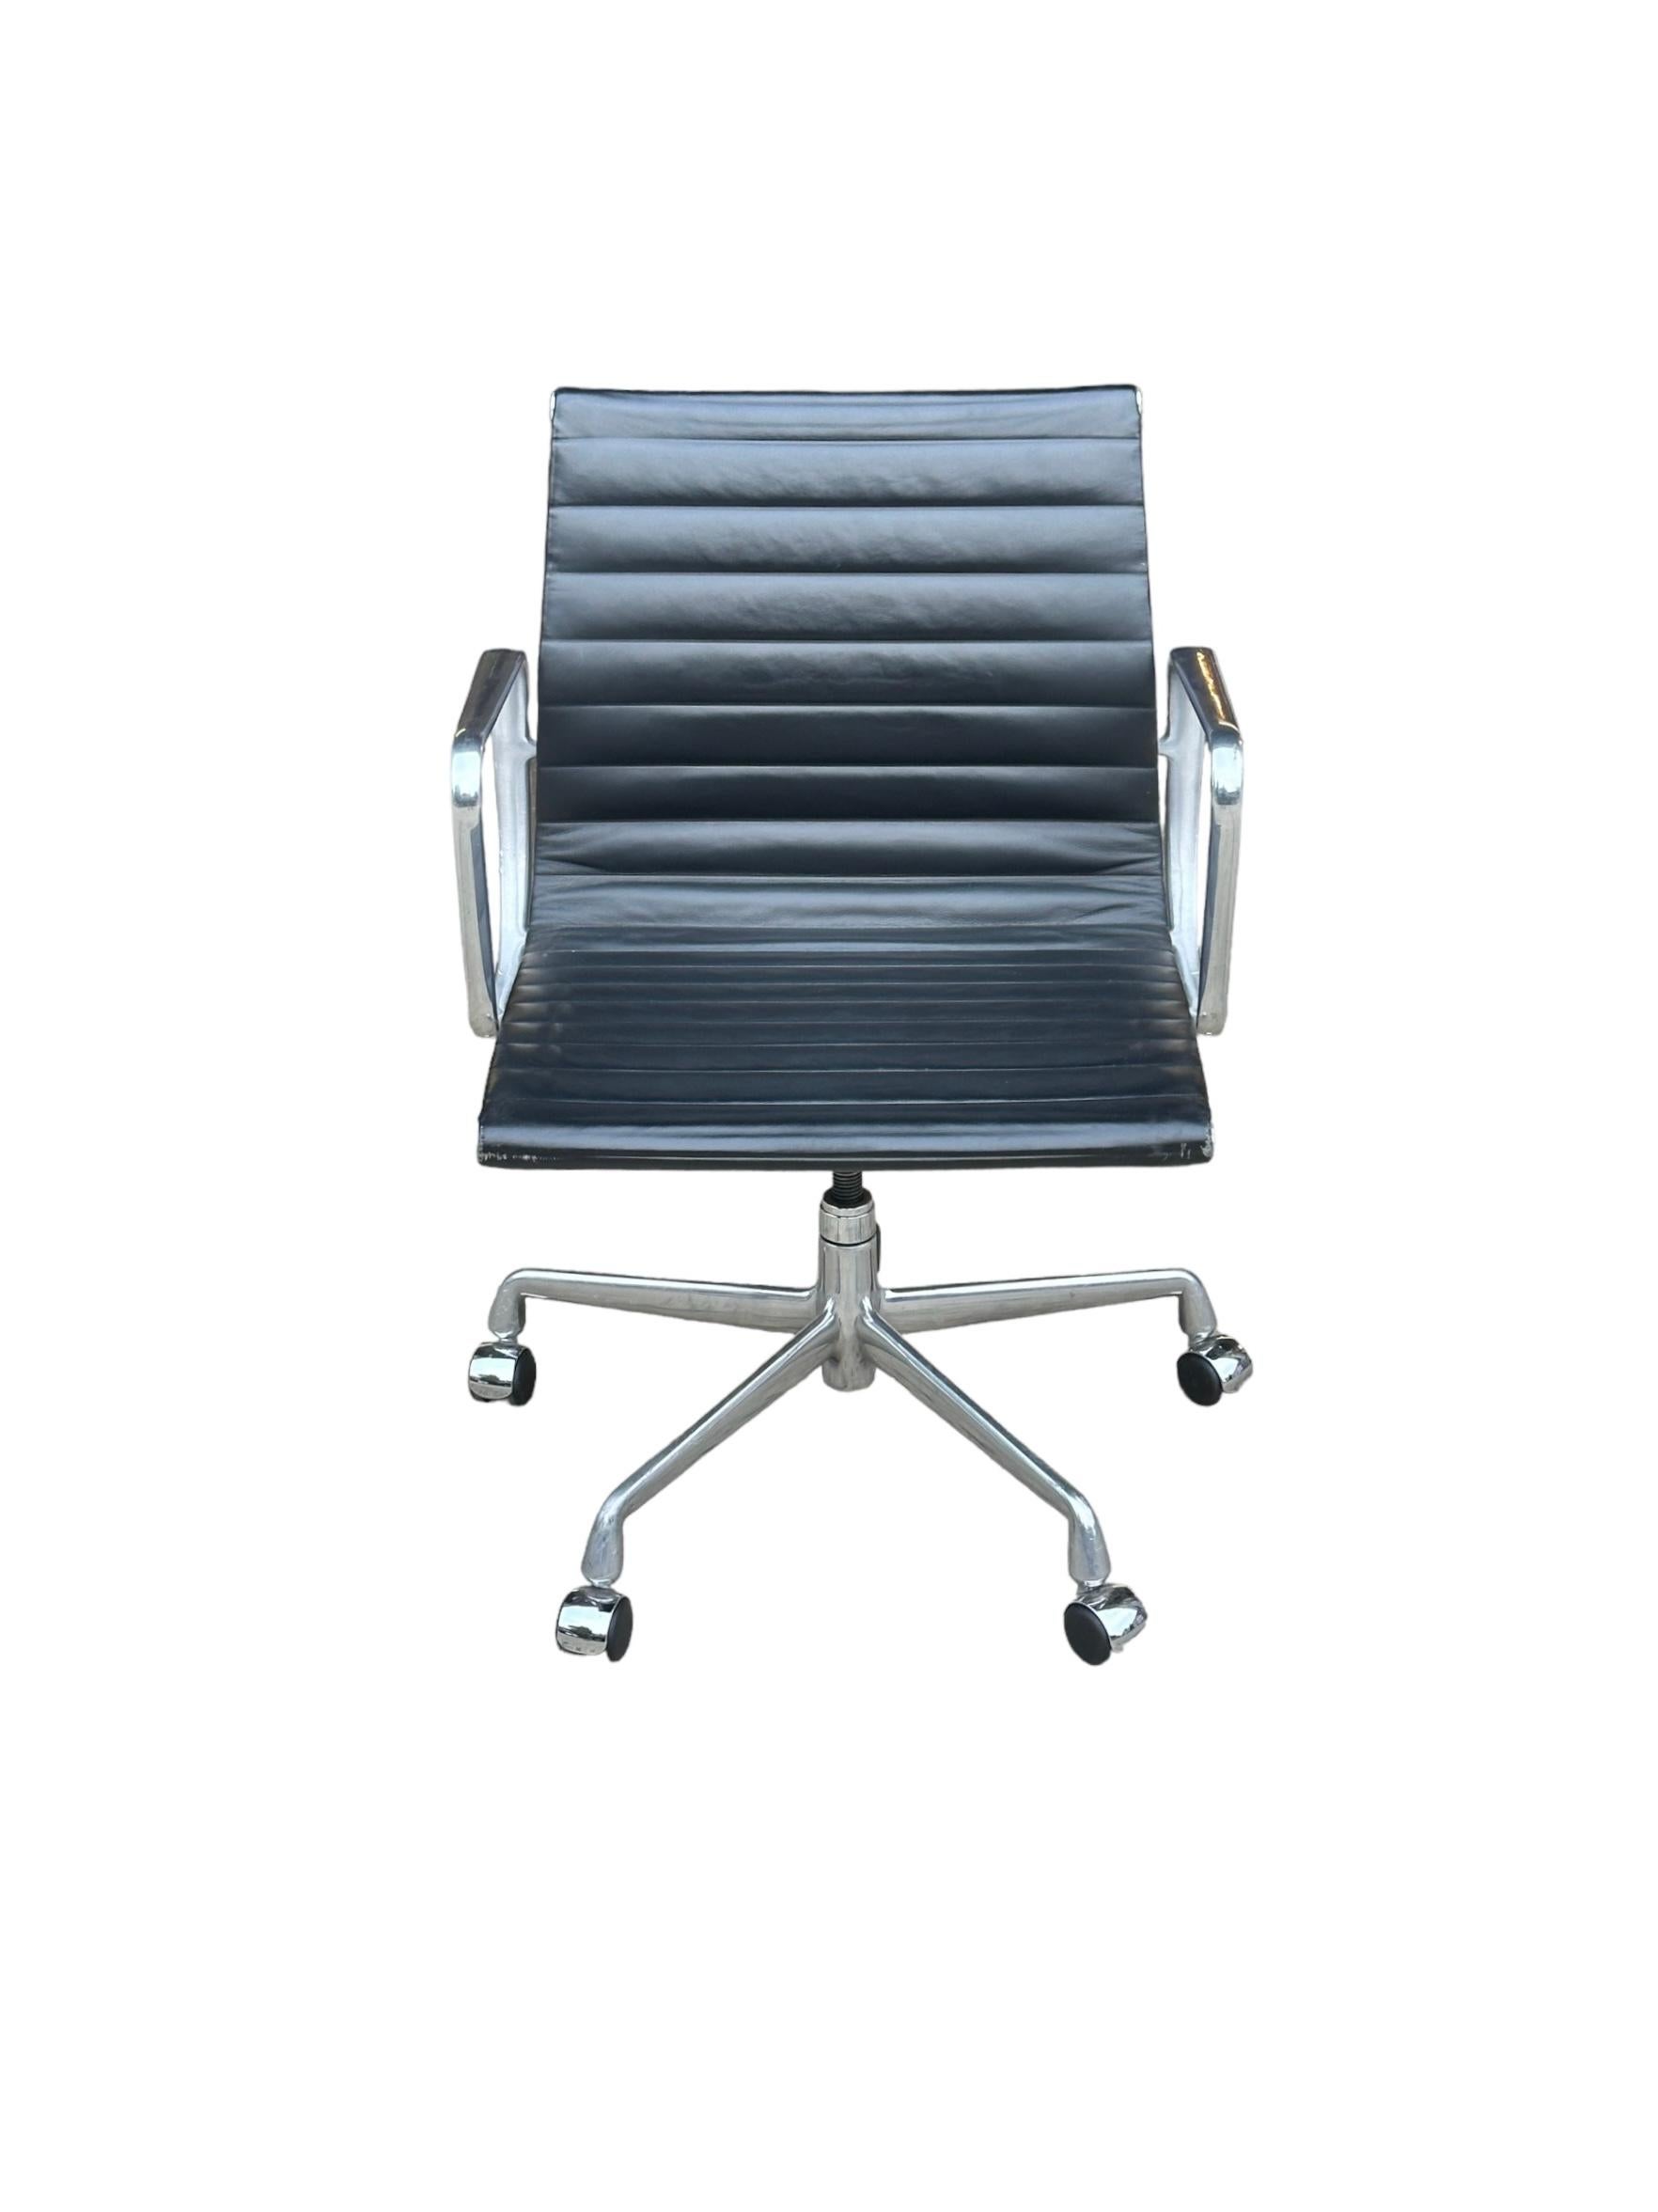 Gorgeous edition of the classic Eames office chair for Herman Miller. Management armchair is executed in polish aluminum and black leather. Minimal wear from age and use. The arms are in better than average condition and everything is in perfect